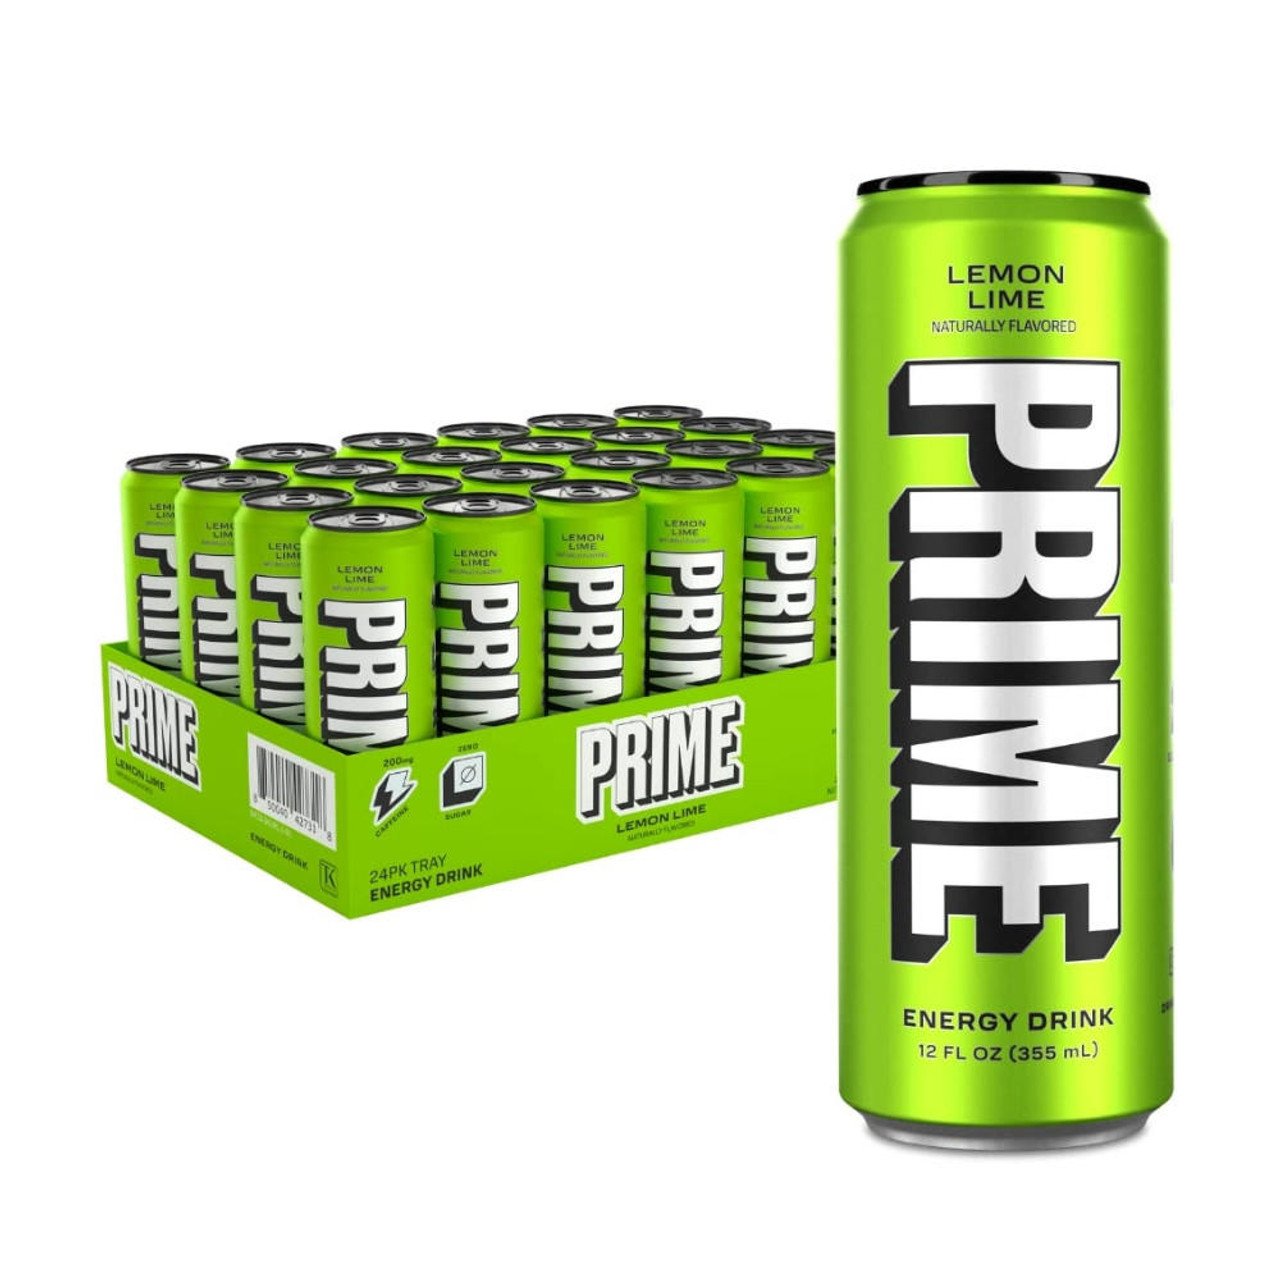 Prime Tropical Punch Energy Drink Can, 12 fl oz - Pay Less Super